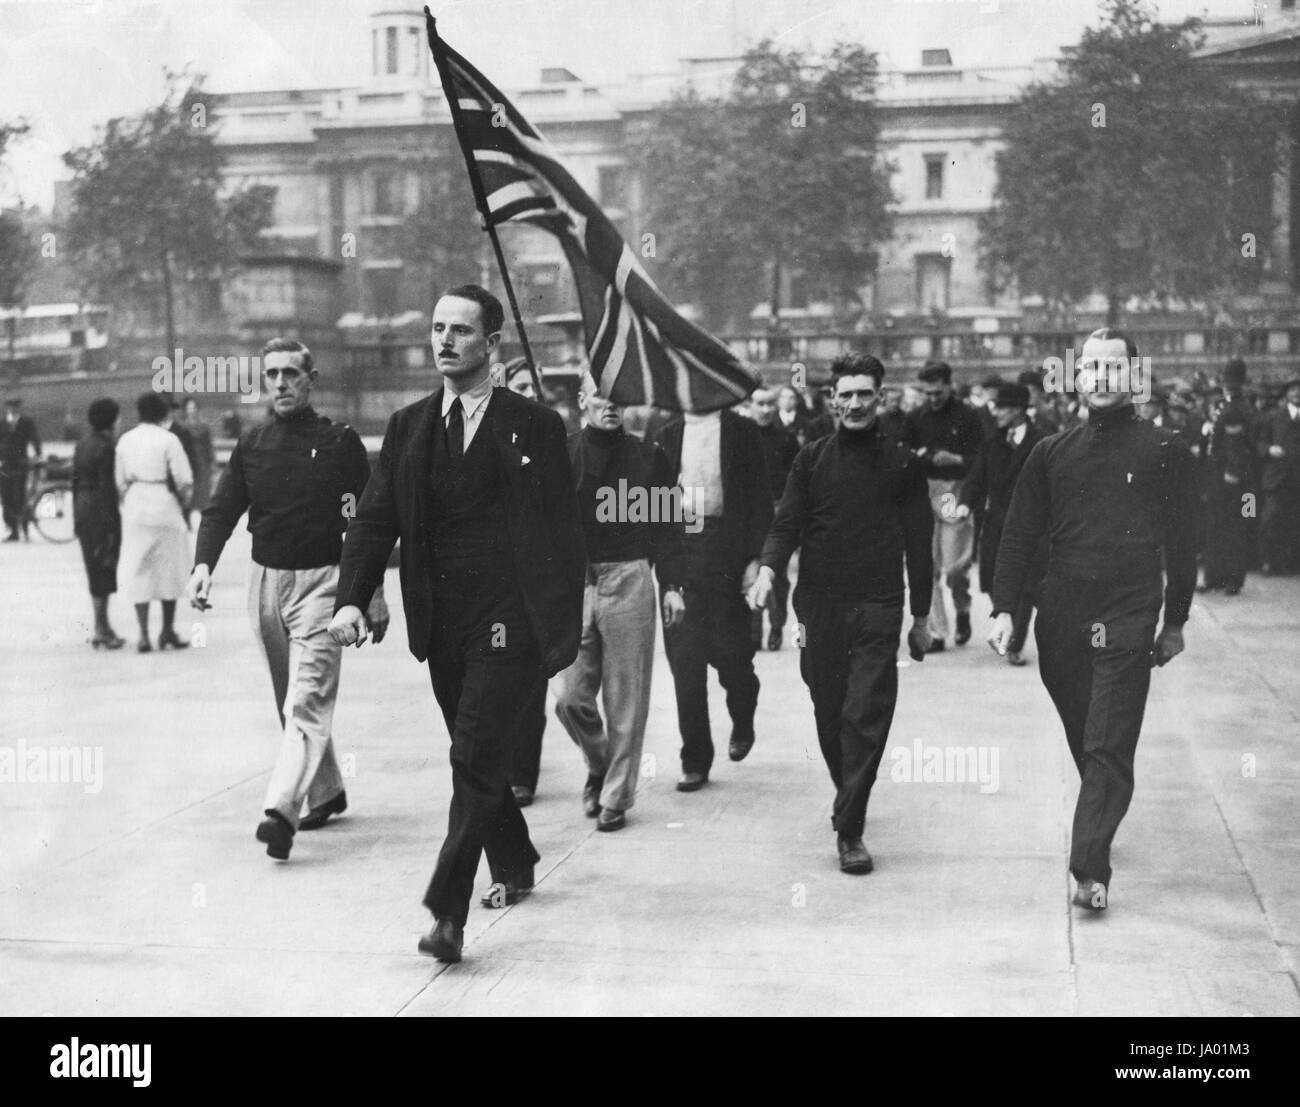 Sir Oswald Mosley leading British Union of Fascists members before a rally in Trafalgar Square, London, England, 1934. Stock Photo